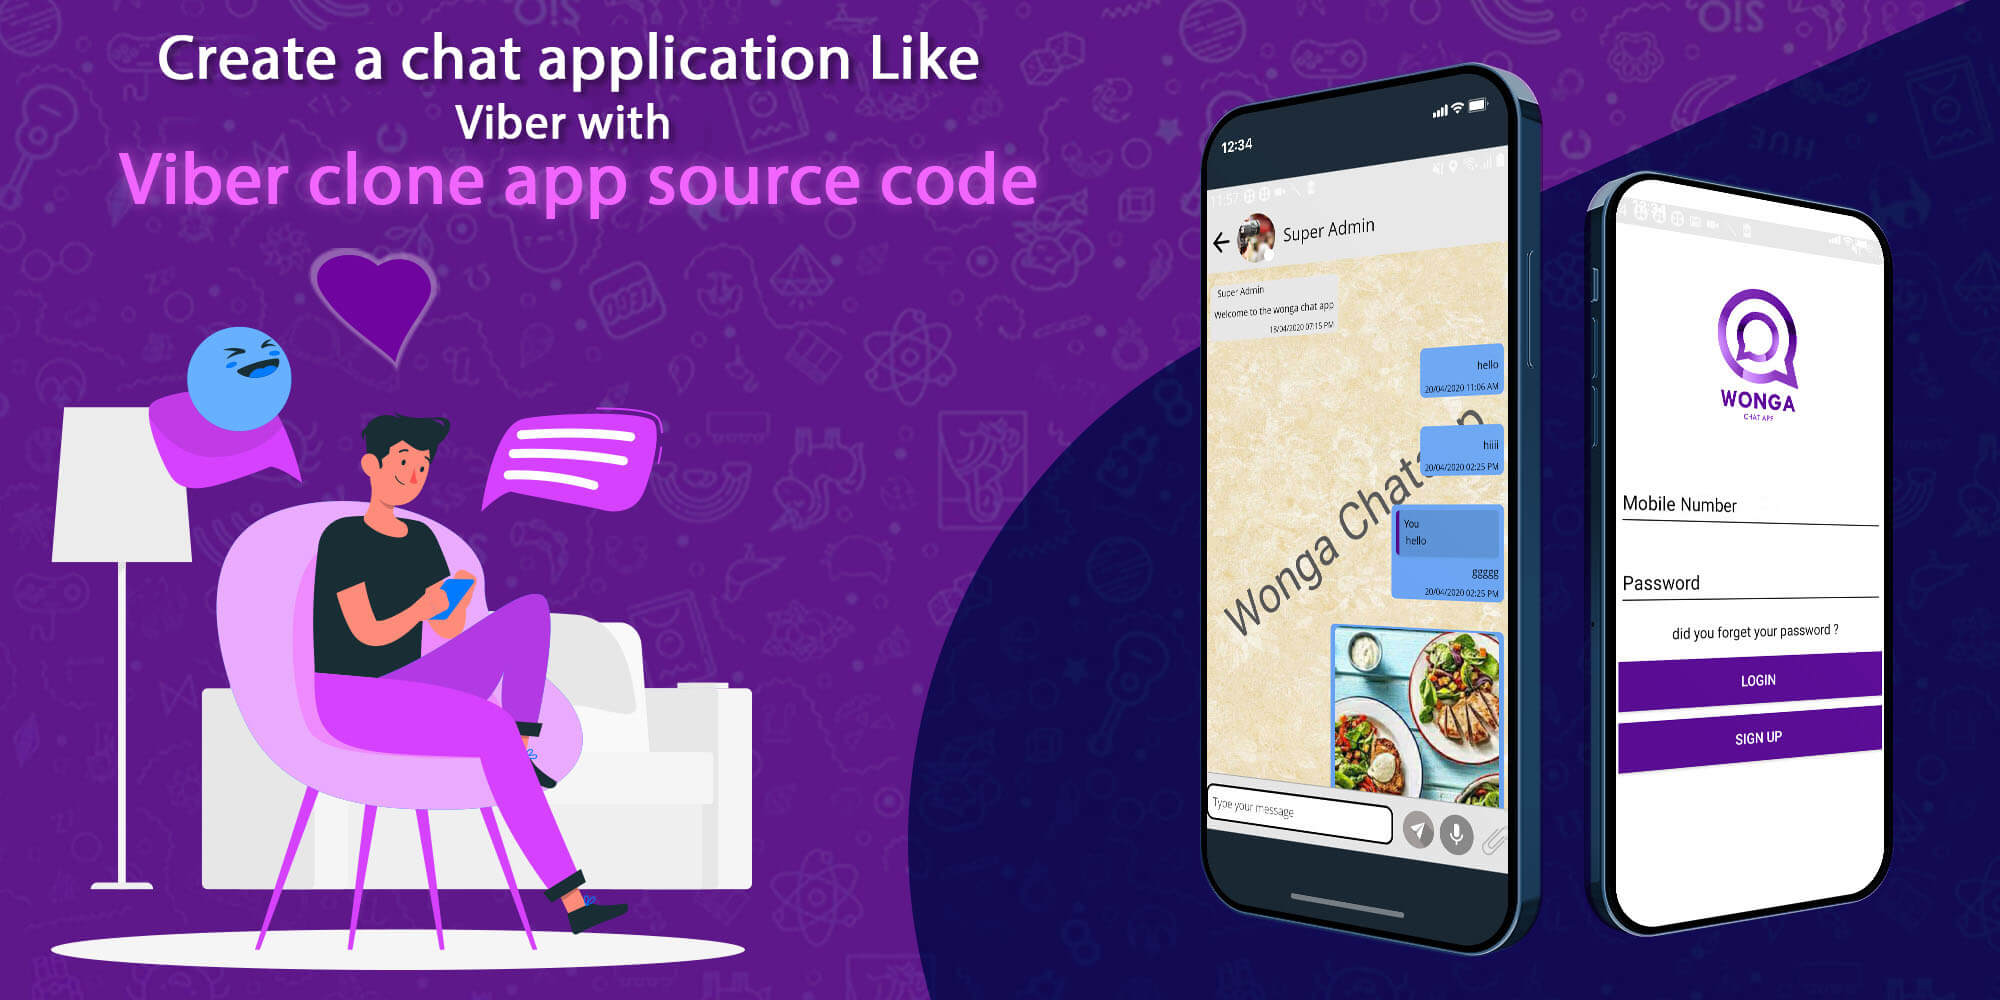 How to create a chat application like Viber with Viber clone app source code